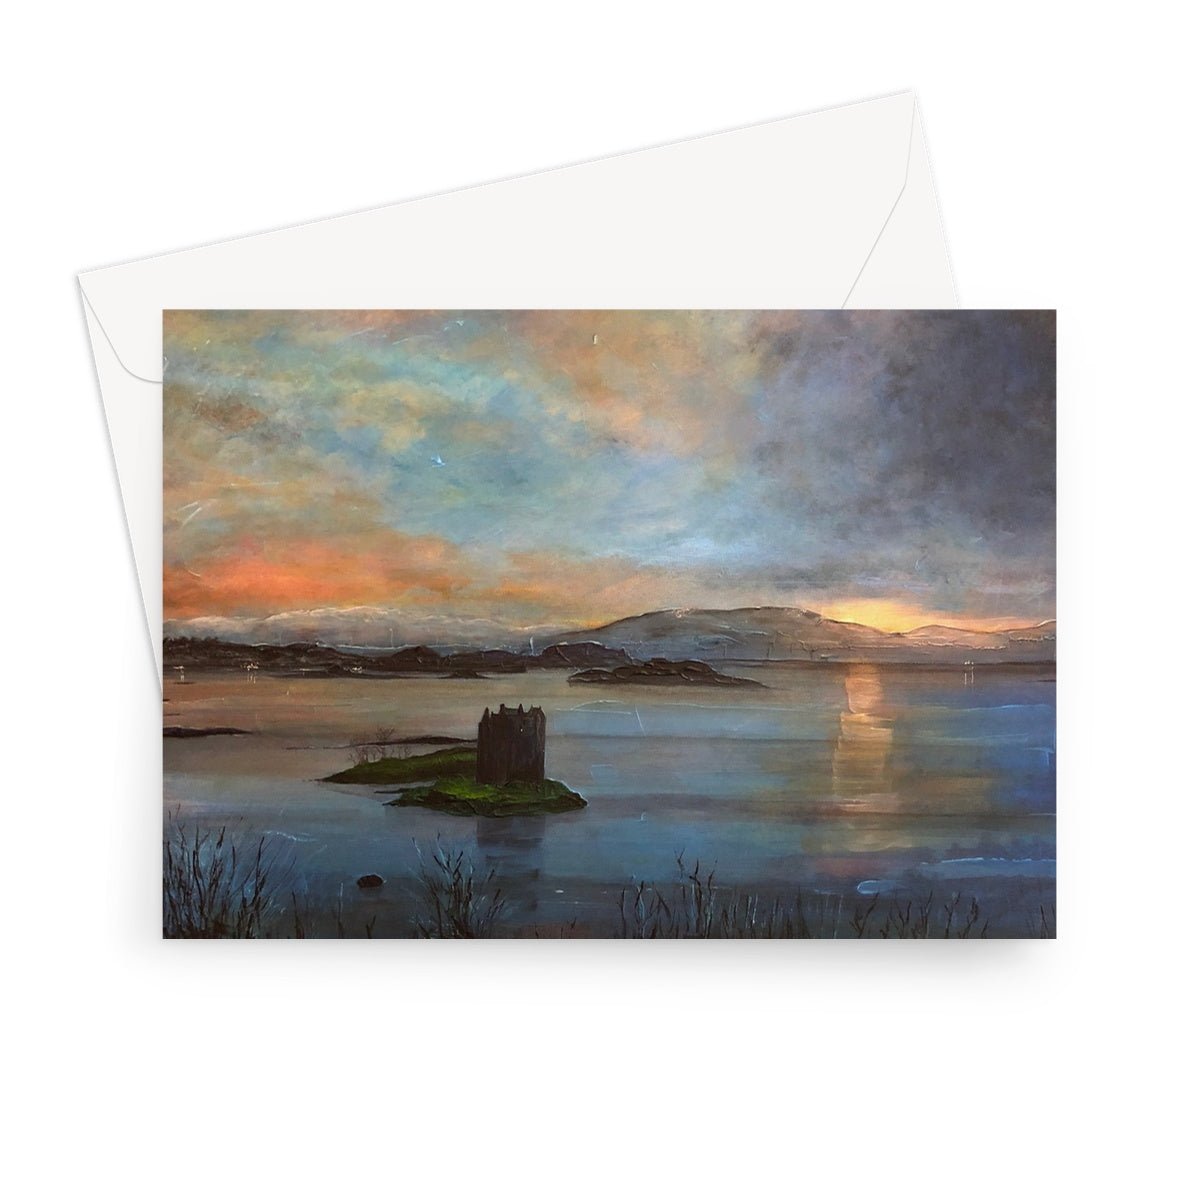 Castle Stalker Twilight Art Gifts Greeting Card-Greetings Cards-Historic & Iconic Scotland Art Gallery-7"x5"-1 Card-Paintings, Prints, Homeware, Art Gifts From Scotland By Scottish Artist Kevin Hunter